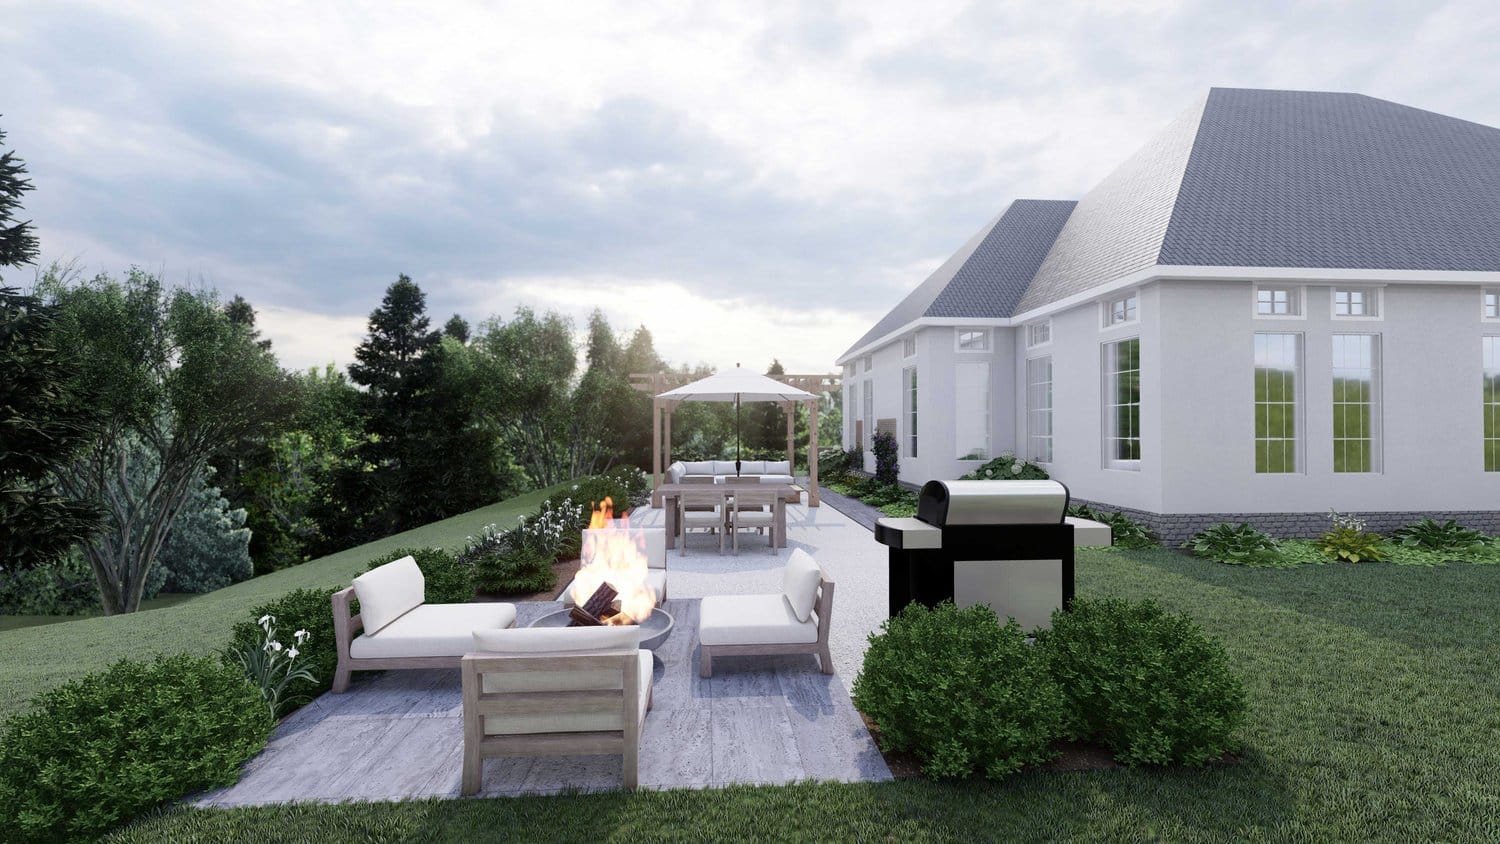 Milwaukee side yard seating area with outdoor kitchen, fire pit, pergola and sunbrella and plants